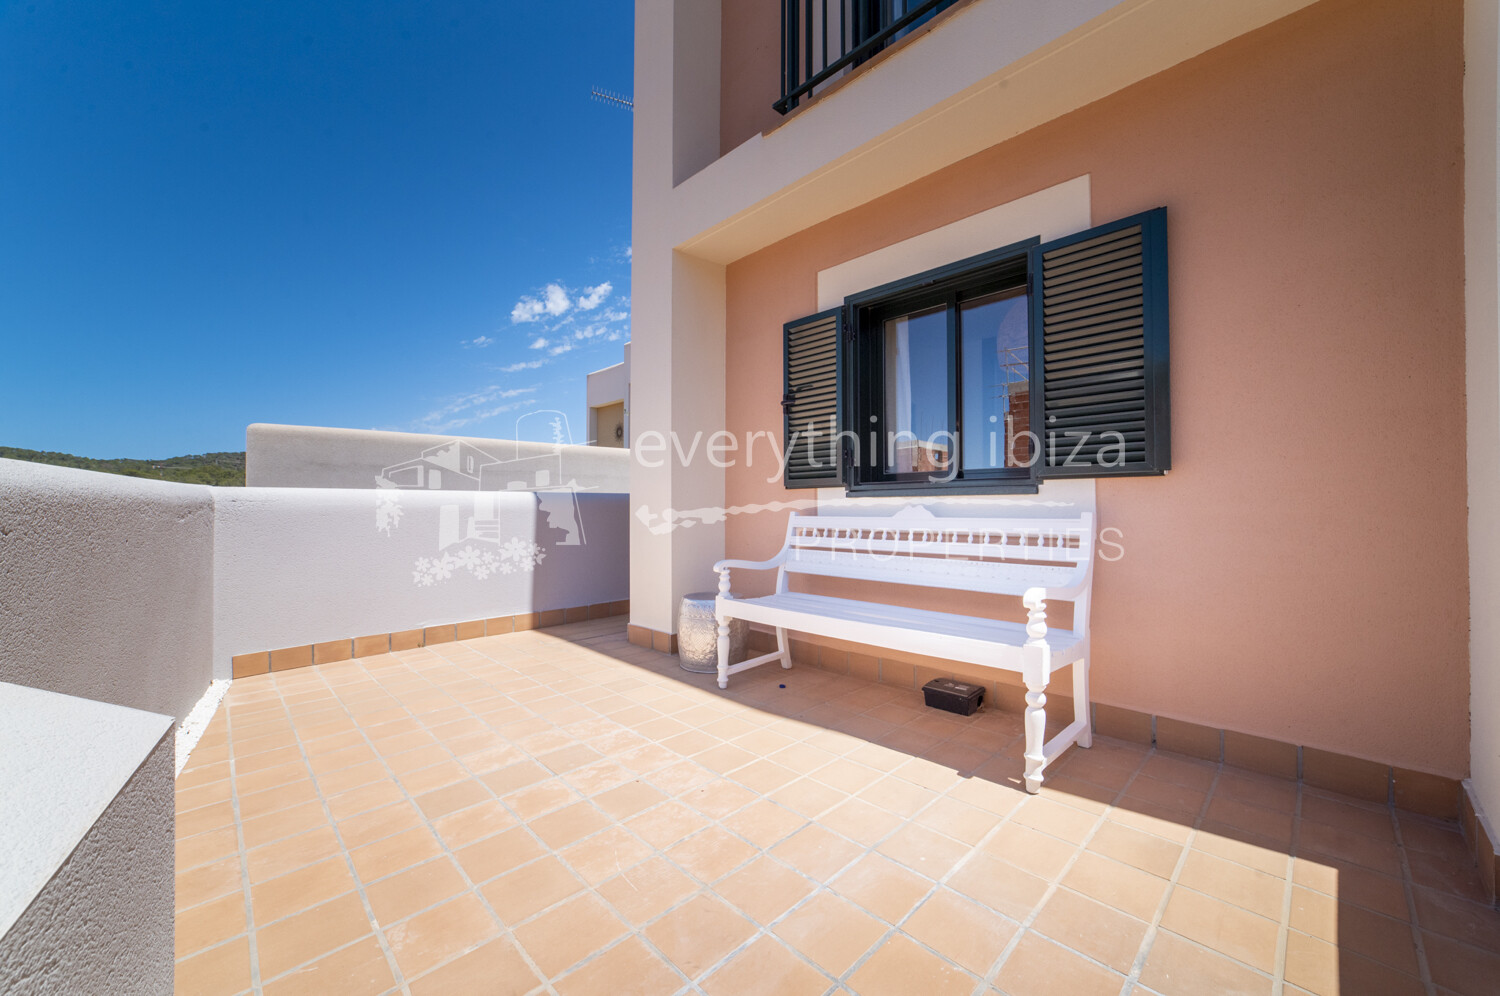 Detached House with Tourist License and Elevated Sea Views Cala Tarida, ref. 1649, for sale in Ibiza by everything ibiza Properties